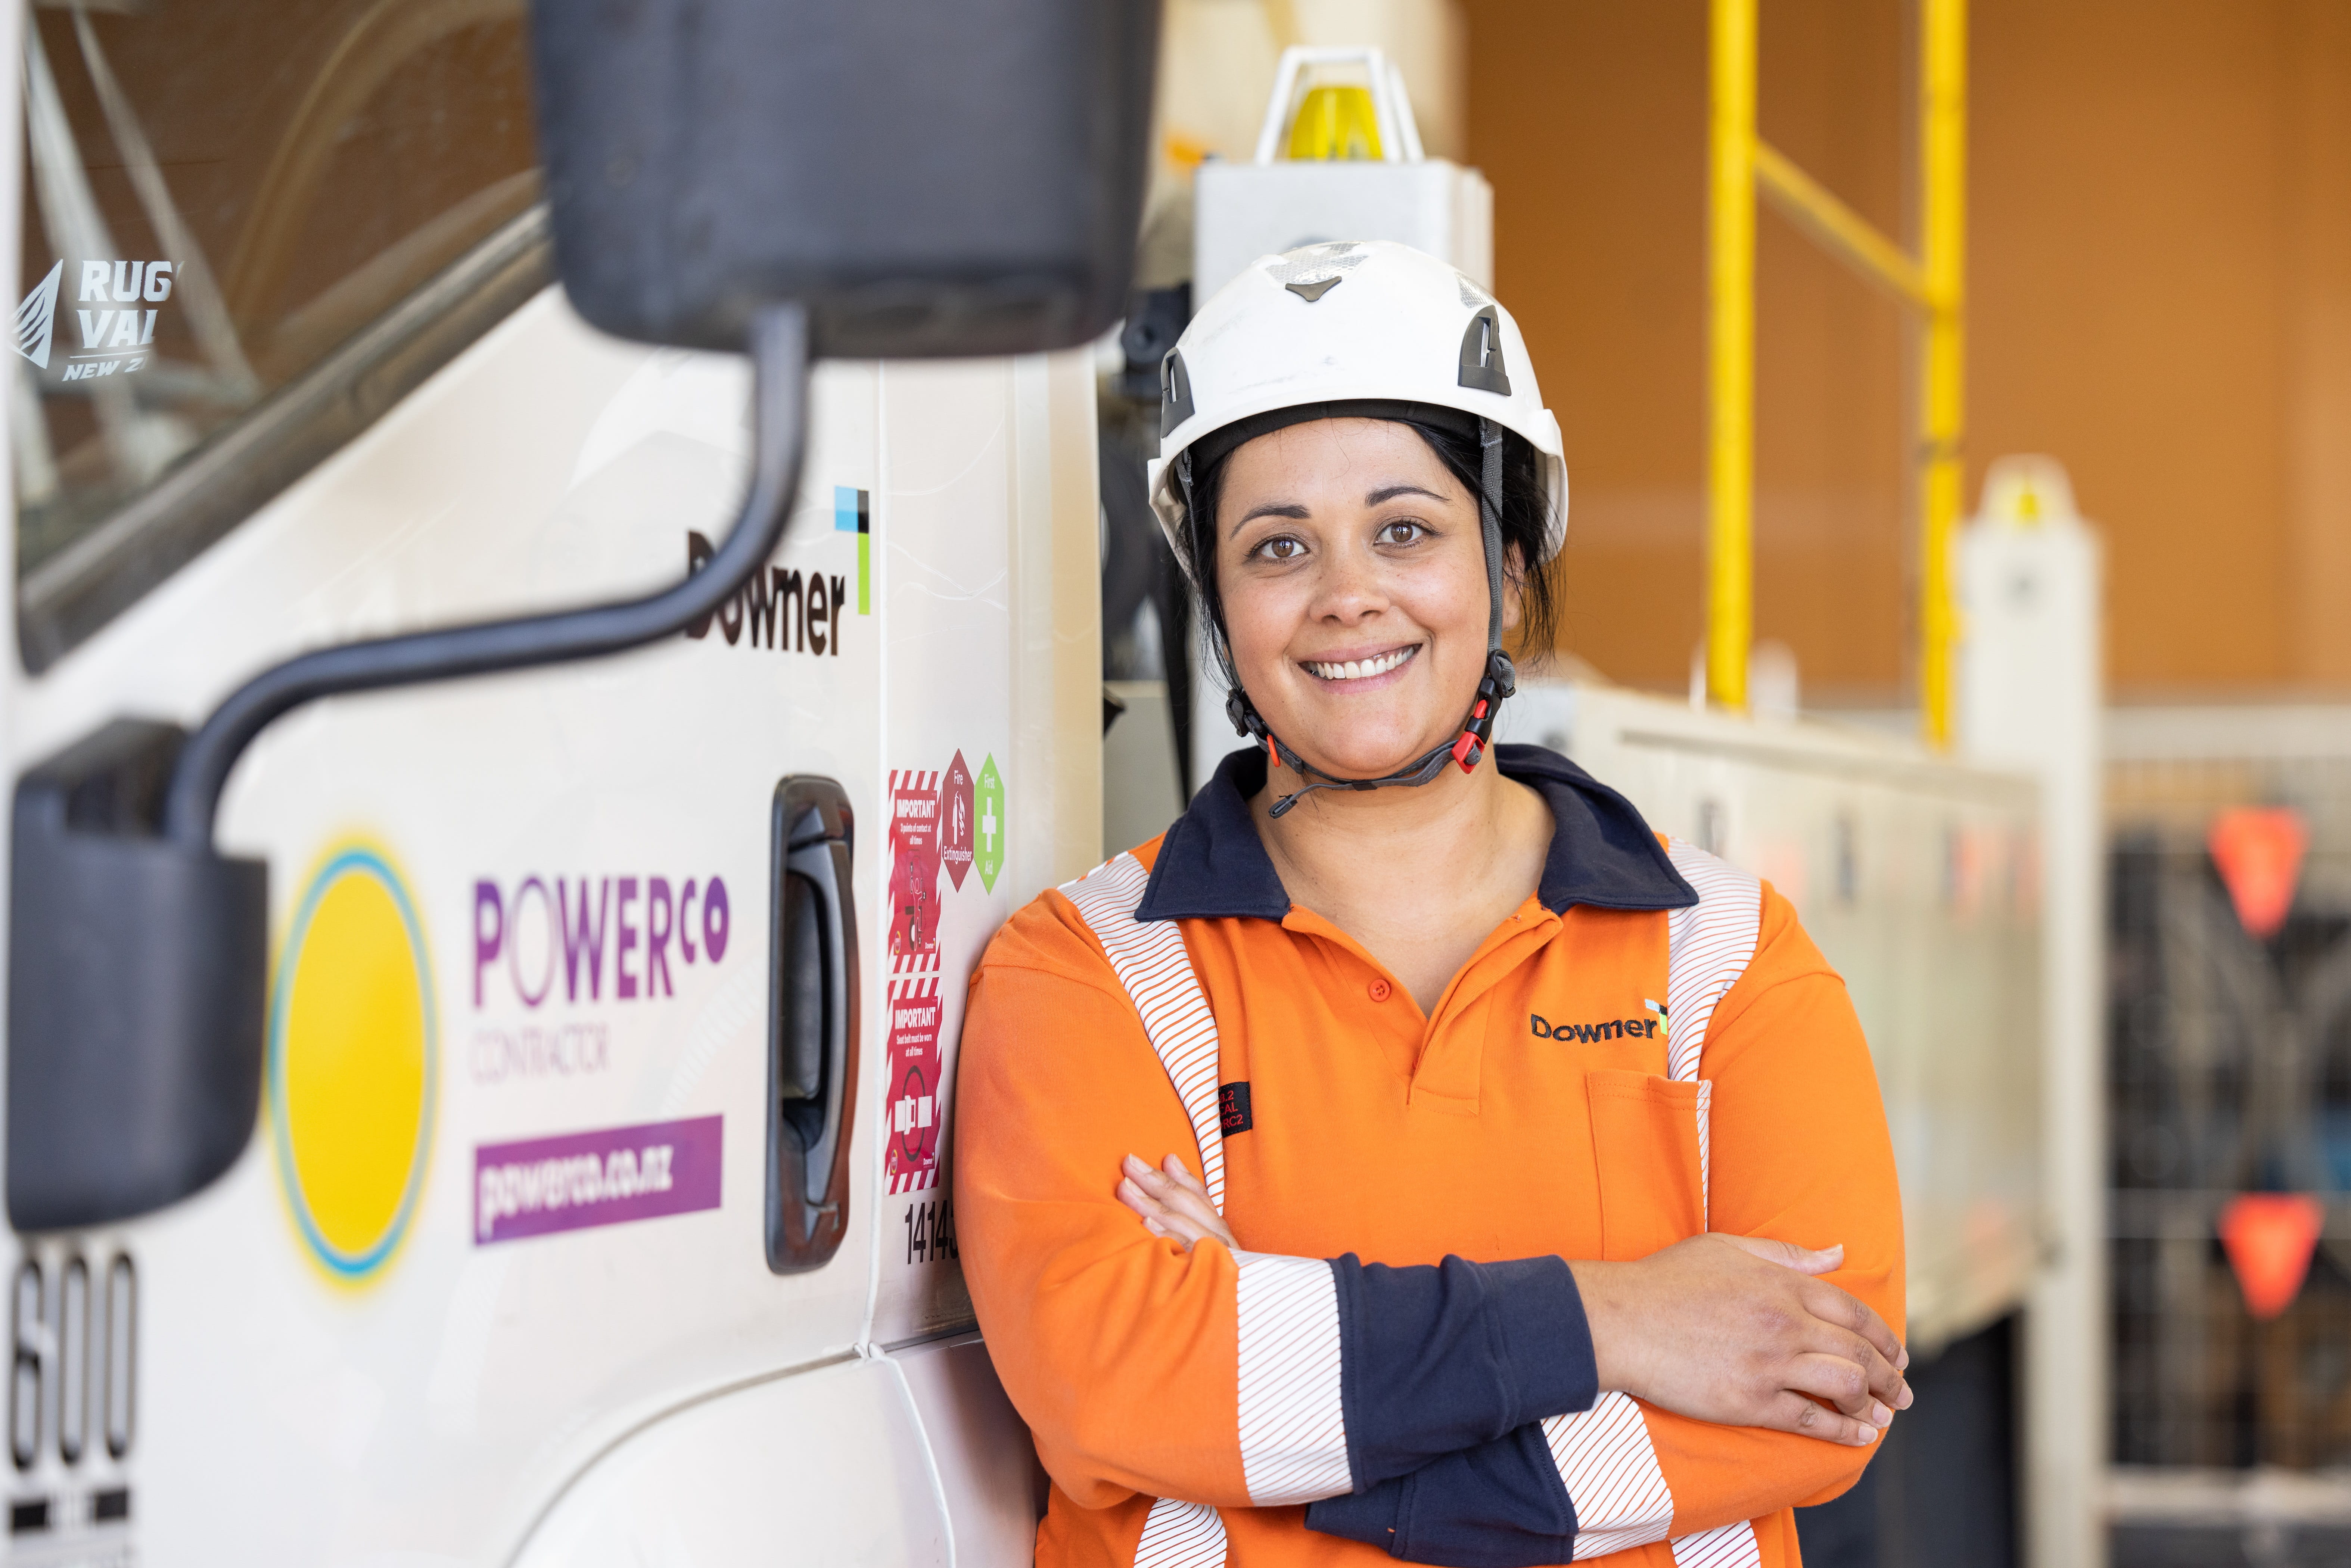 A female power line mechanic with helmet and PPE on, smiling and posing beside a work truck